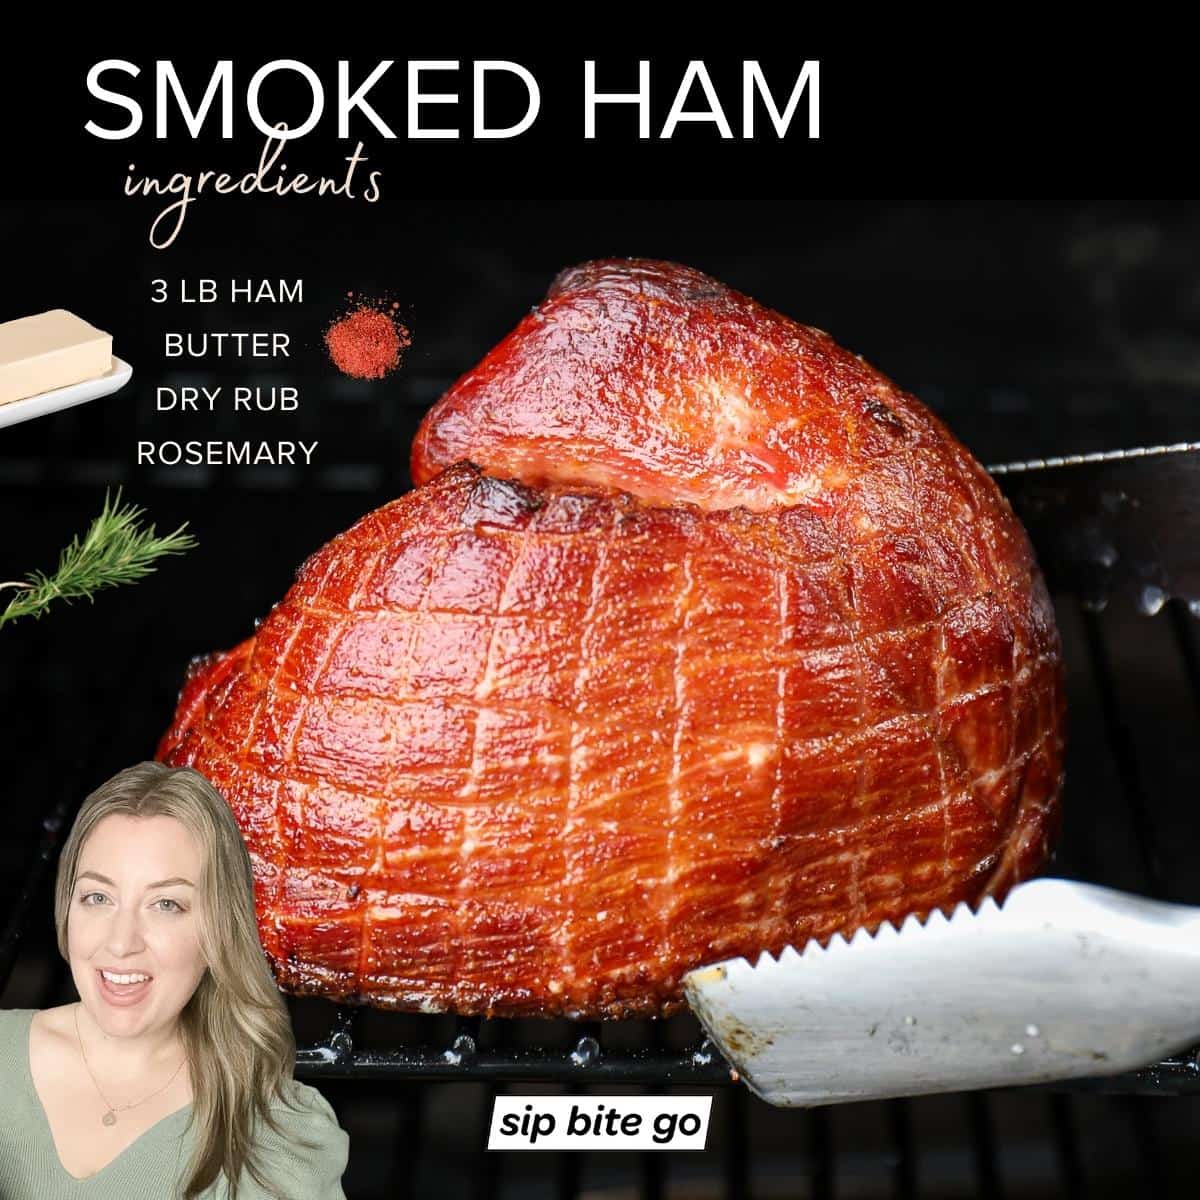 Infographic with ingredients for making smoked ham on the traeger grill with captions